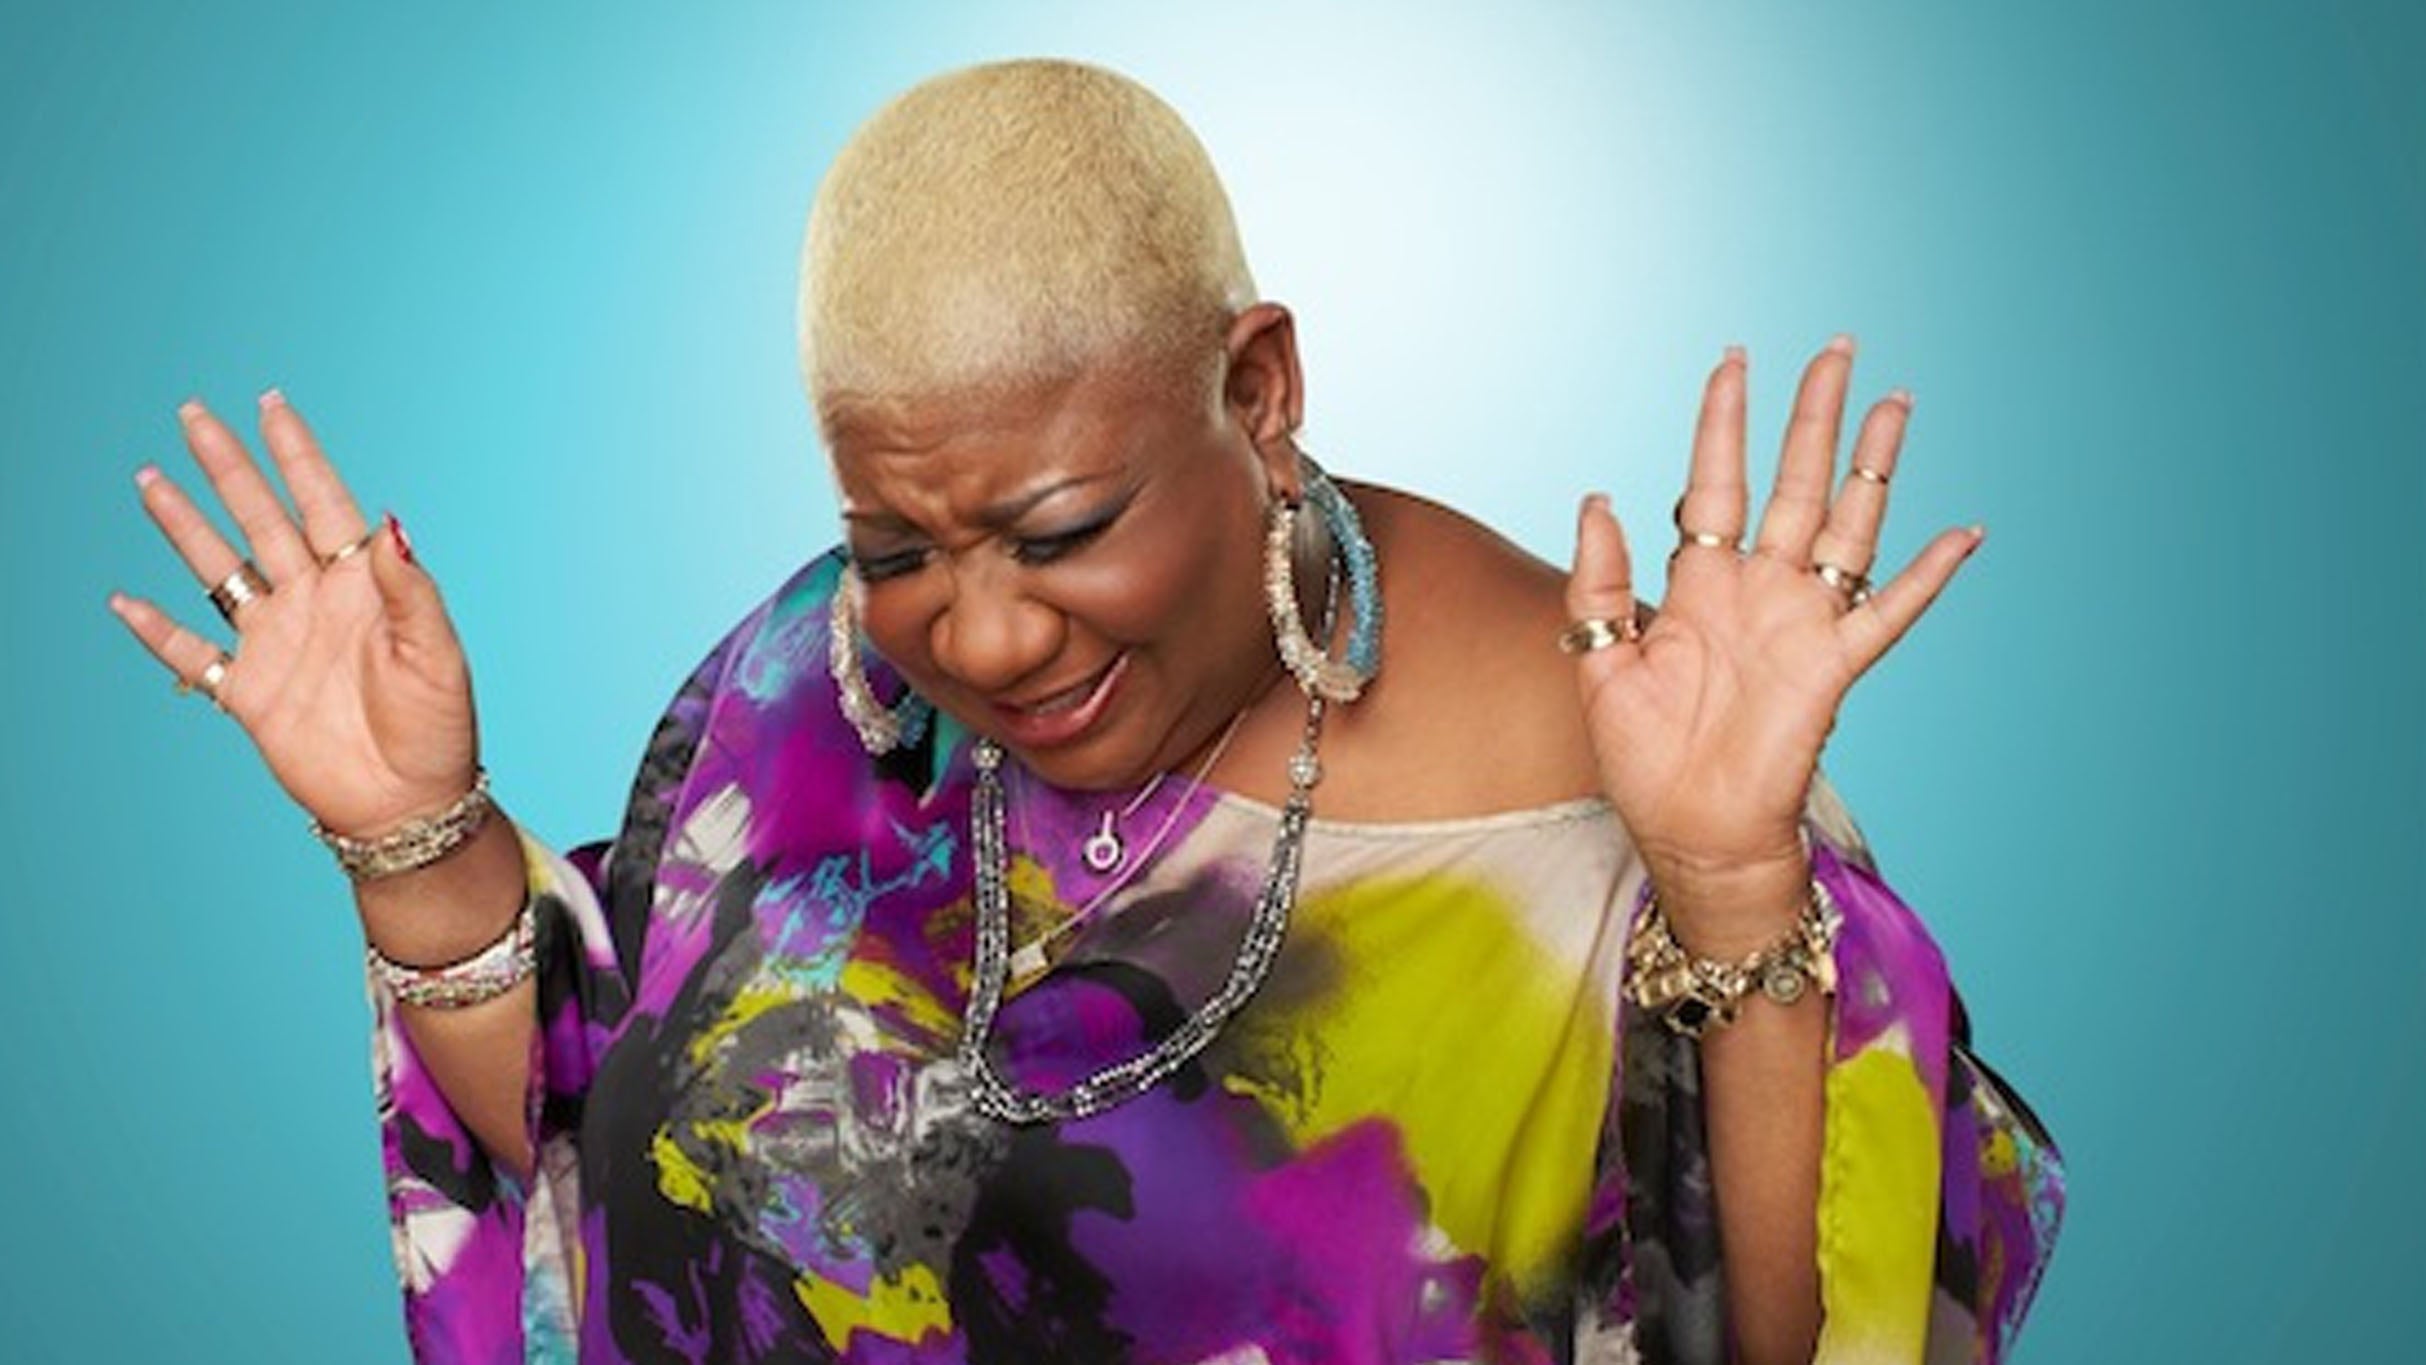 Luenell at Jimmy Kimmel's Comedy Club